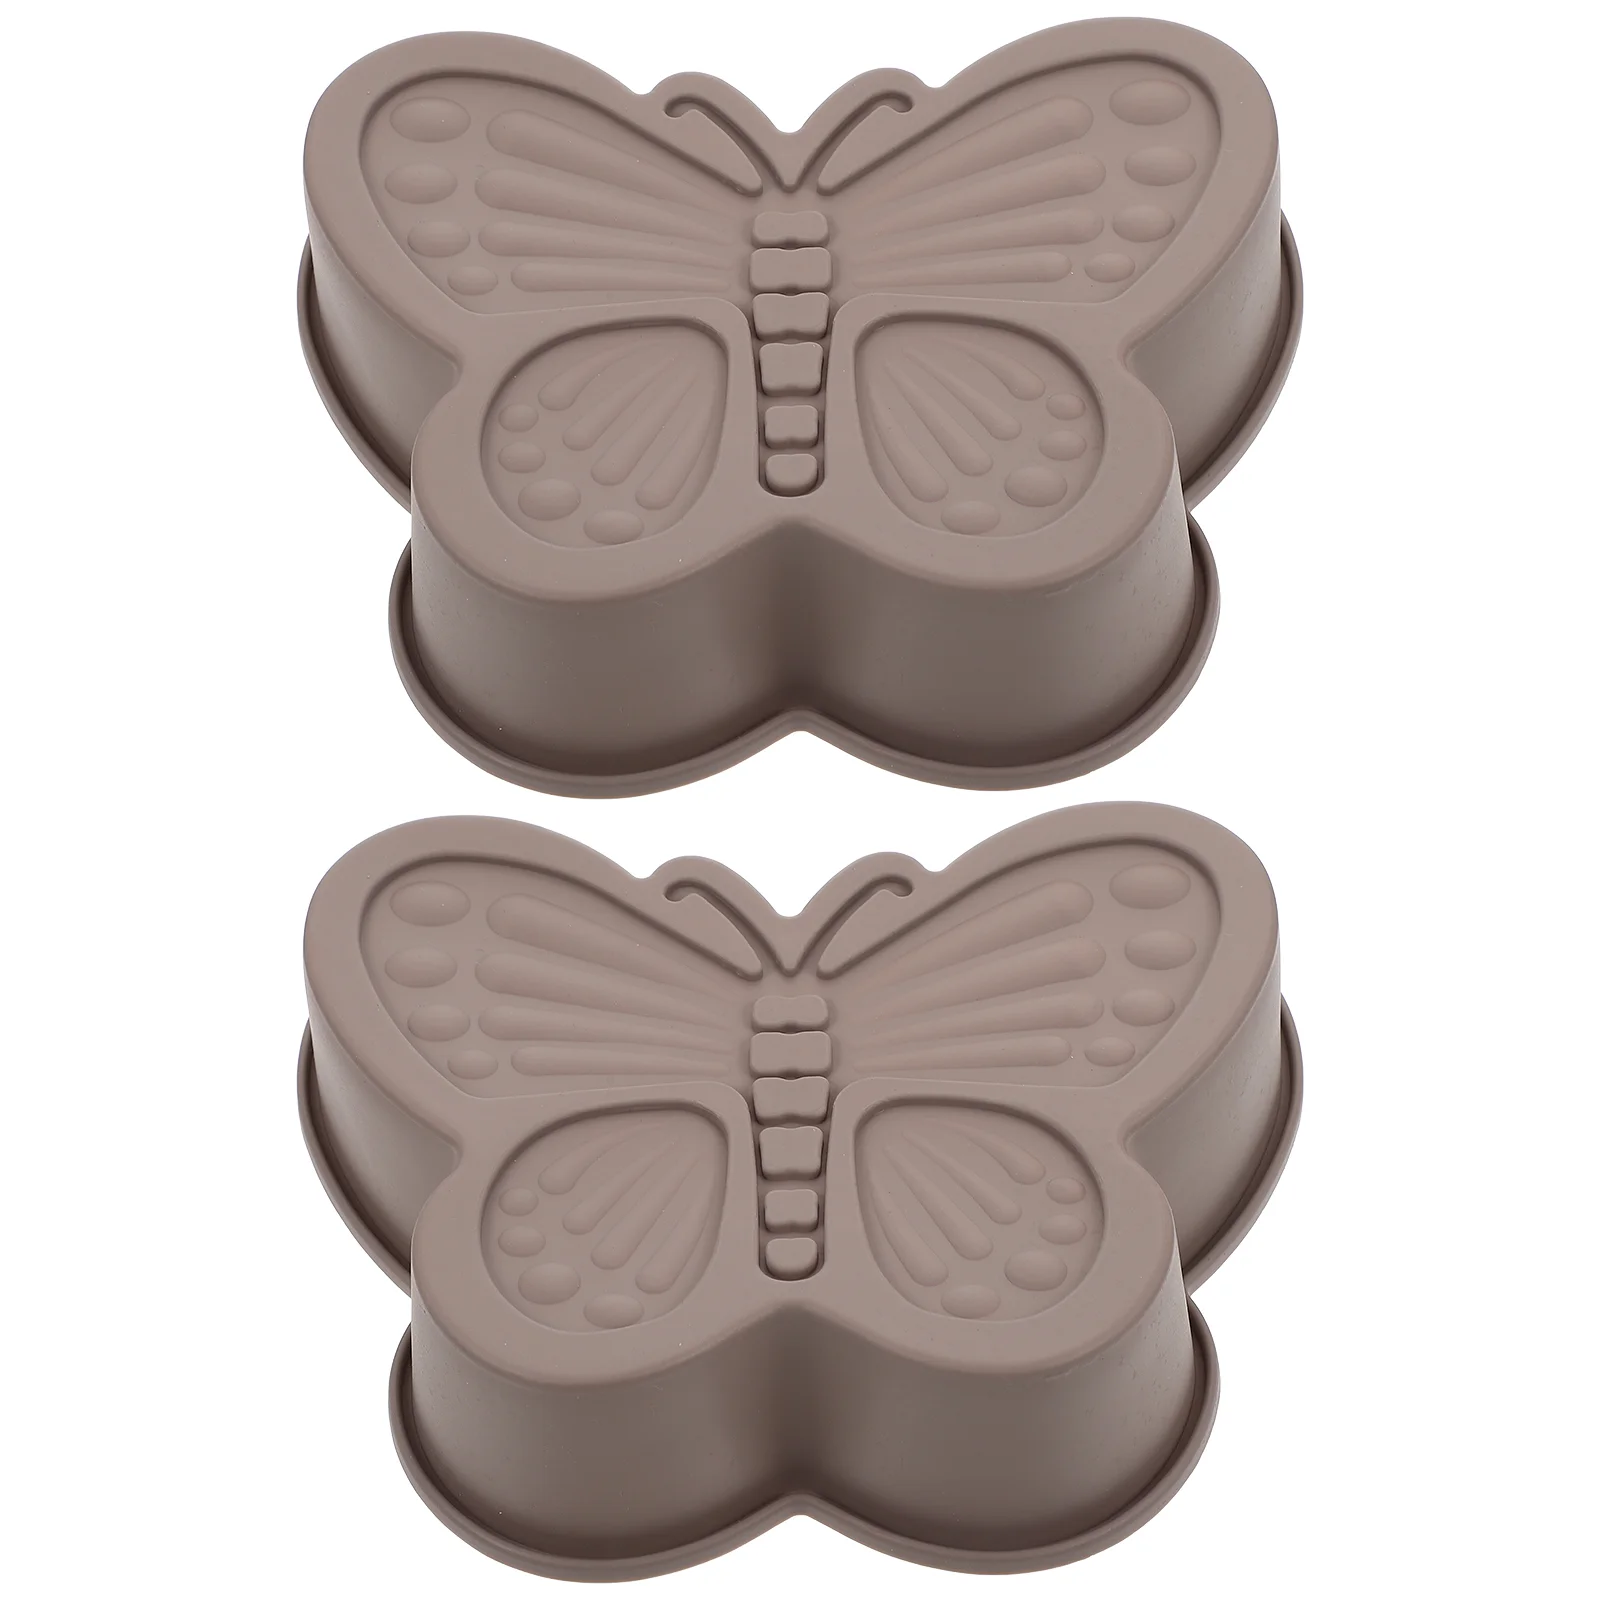 

2 Pcs Resin Silicone Molds Butterfly Cake Non-stick Mousse Bakeware Making Tool Dessert Silica Gel Kitchen Baking Supply DIY